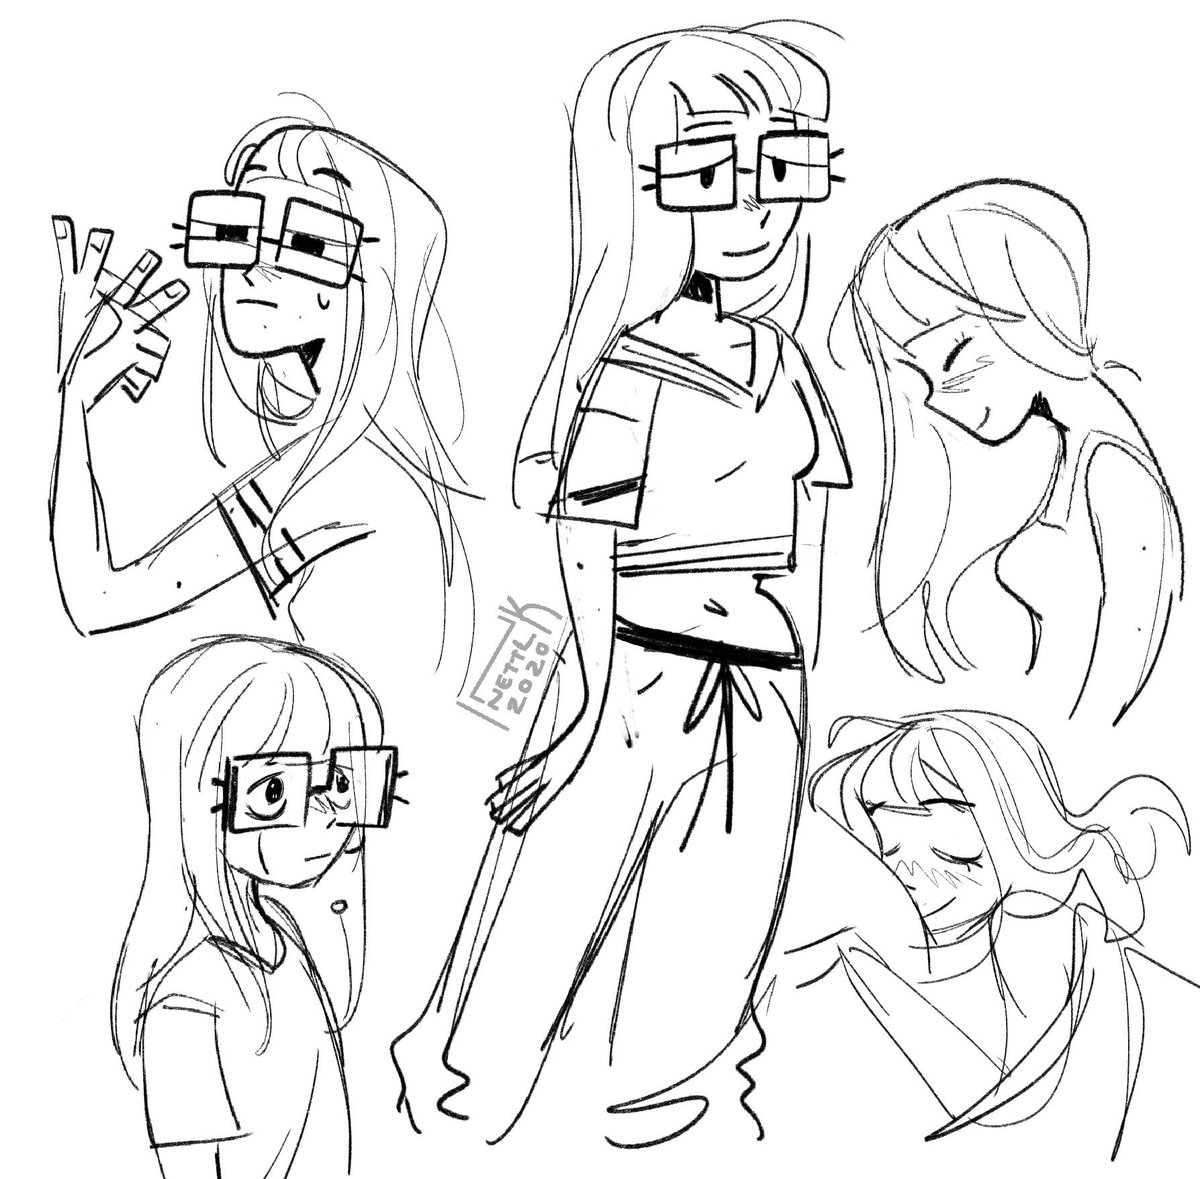 Some self doodles 